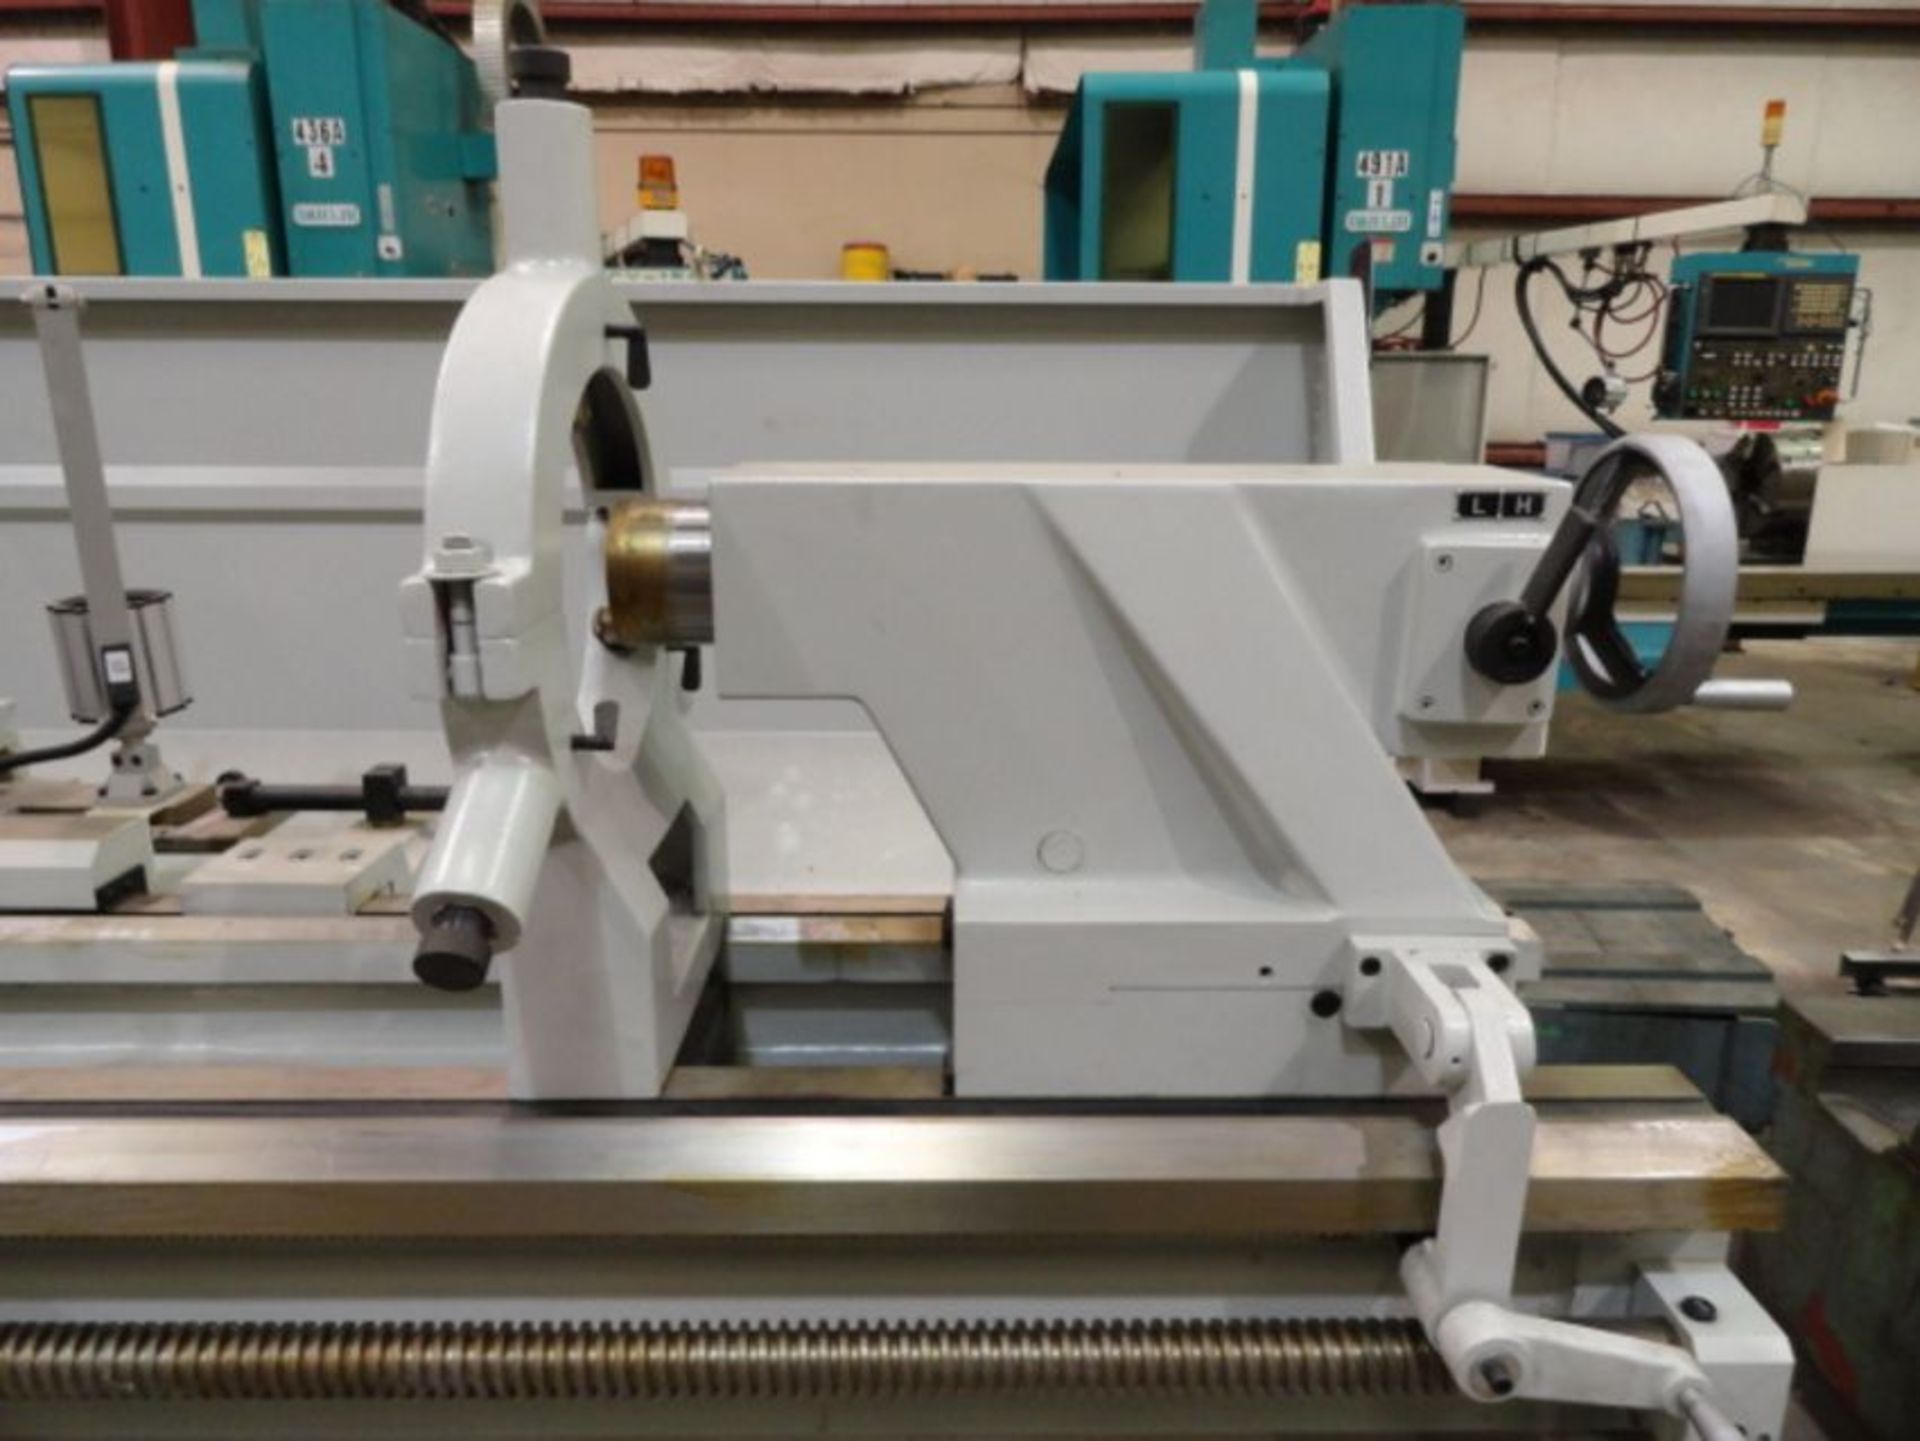 GAP BED ENGINE LATHE, ROUGHNECK 26" X 80" (CHU SHING) (NEW), 17-3/8” sw. over crosslide, 38-1/8” sw. - Image 8 of 8